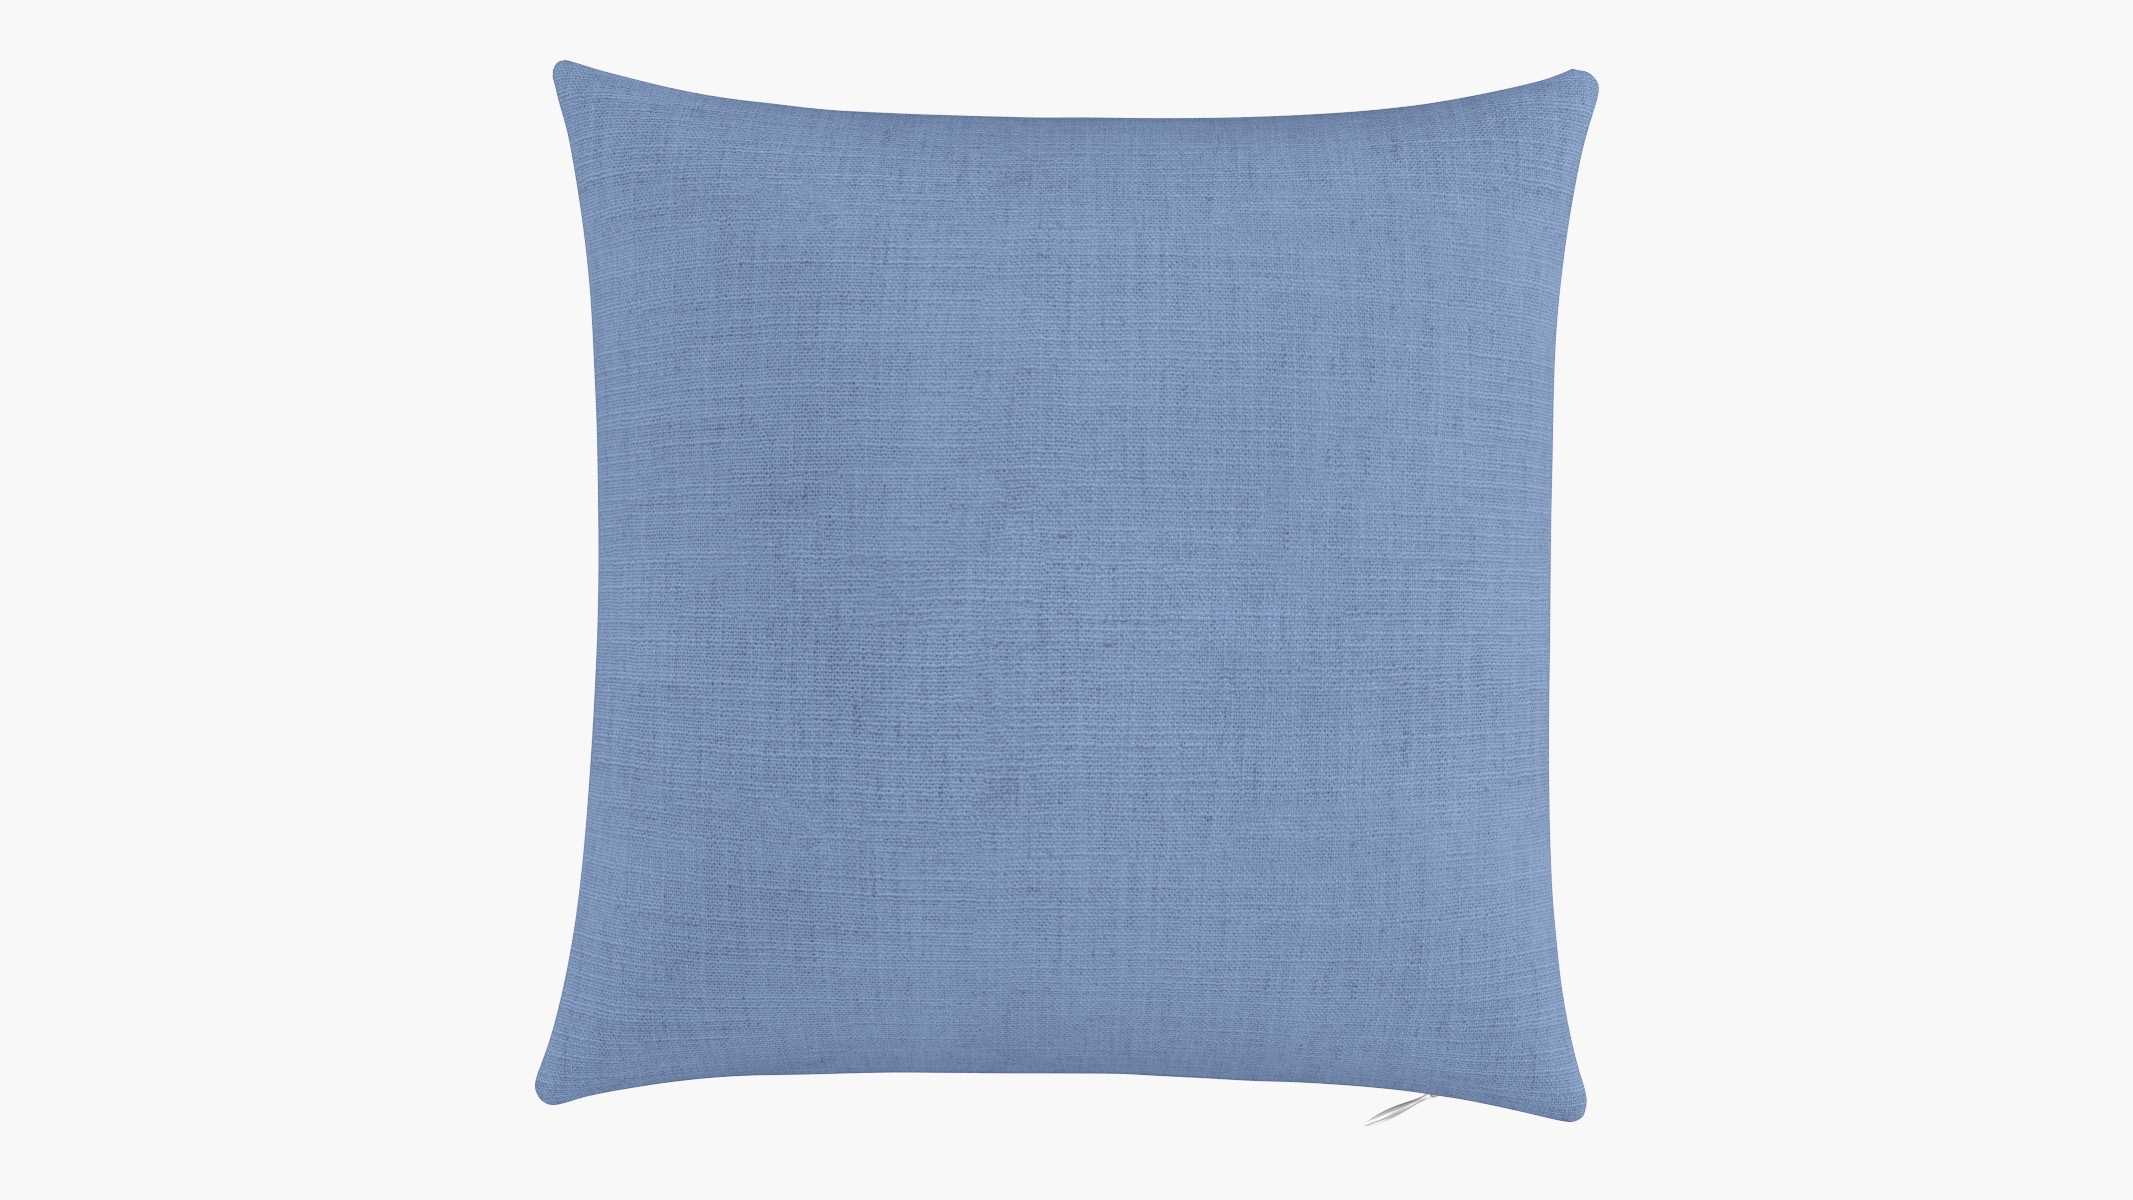 Throw Pillow 16", French Blue Linen, 16" x 16" - Image 0